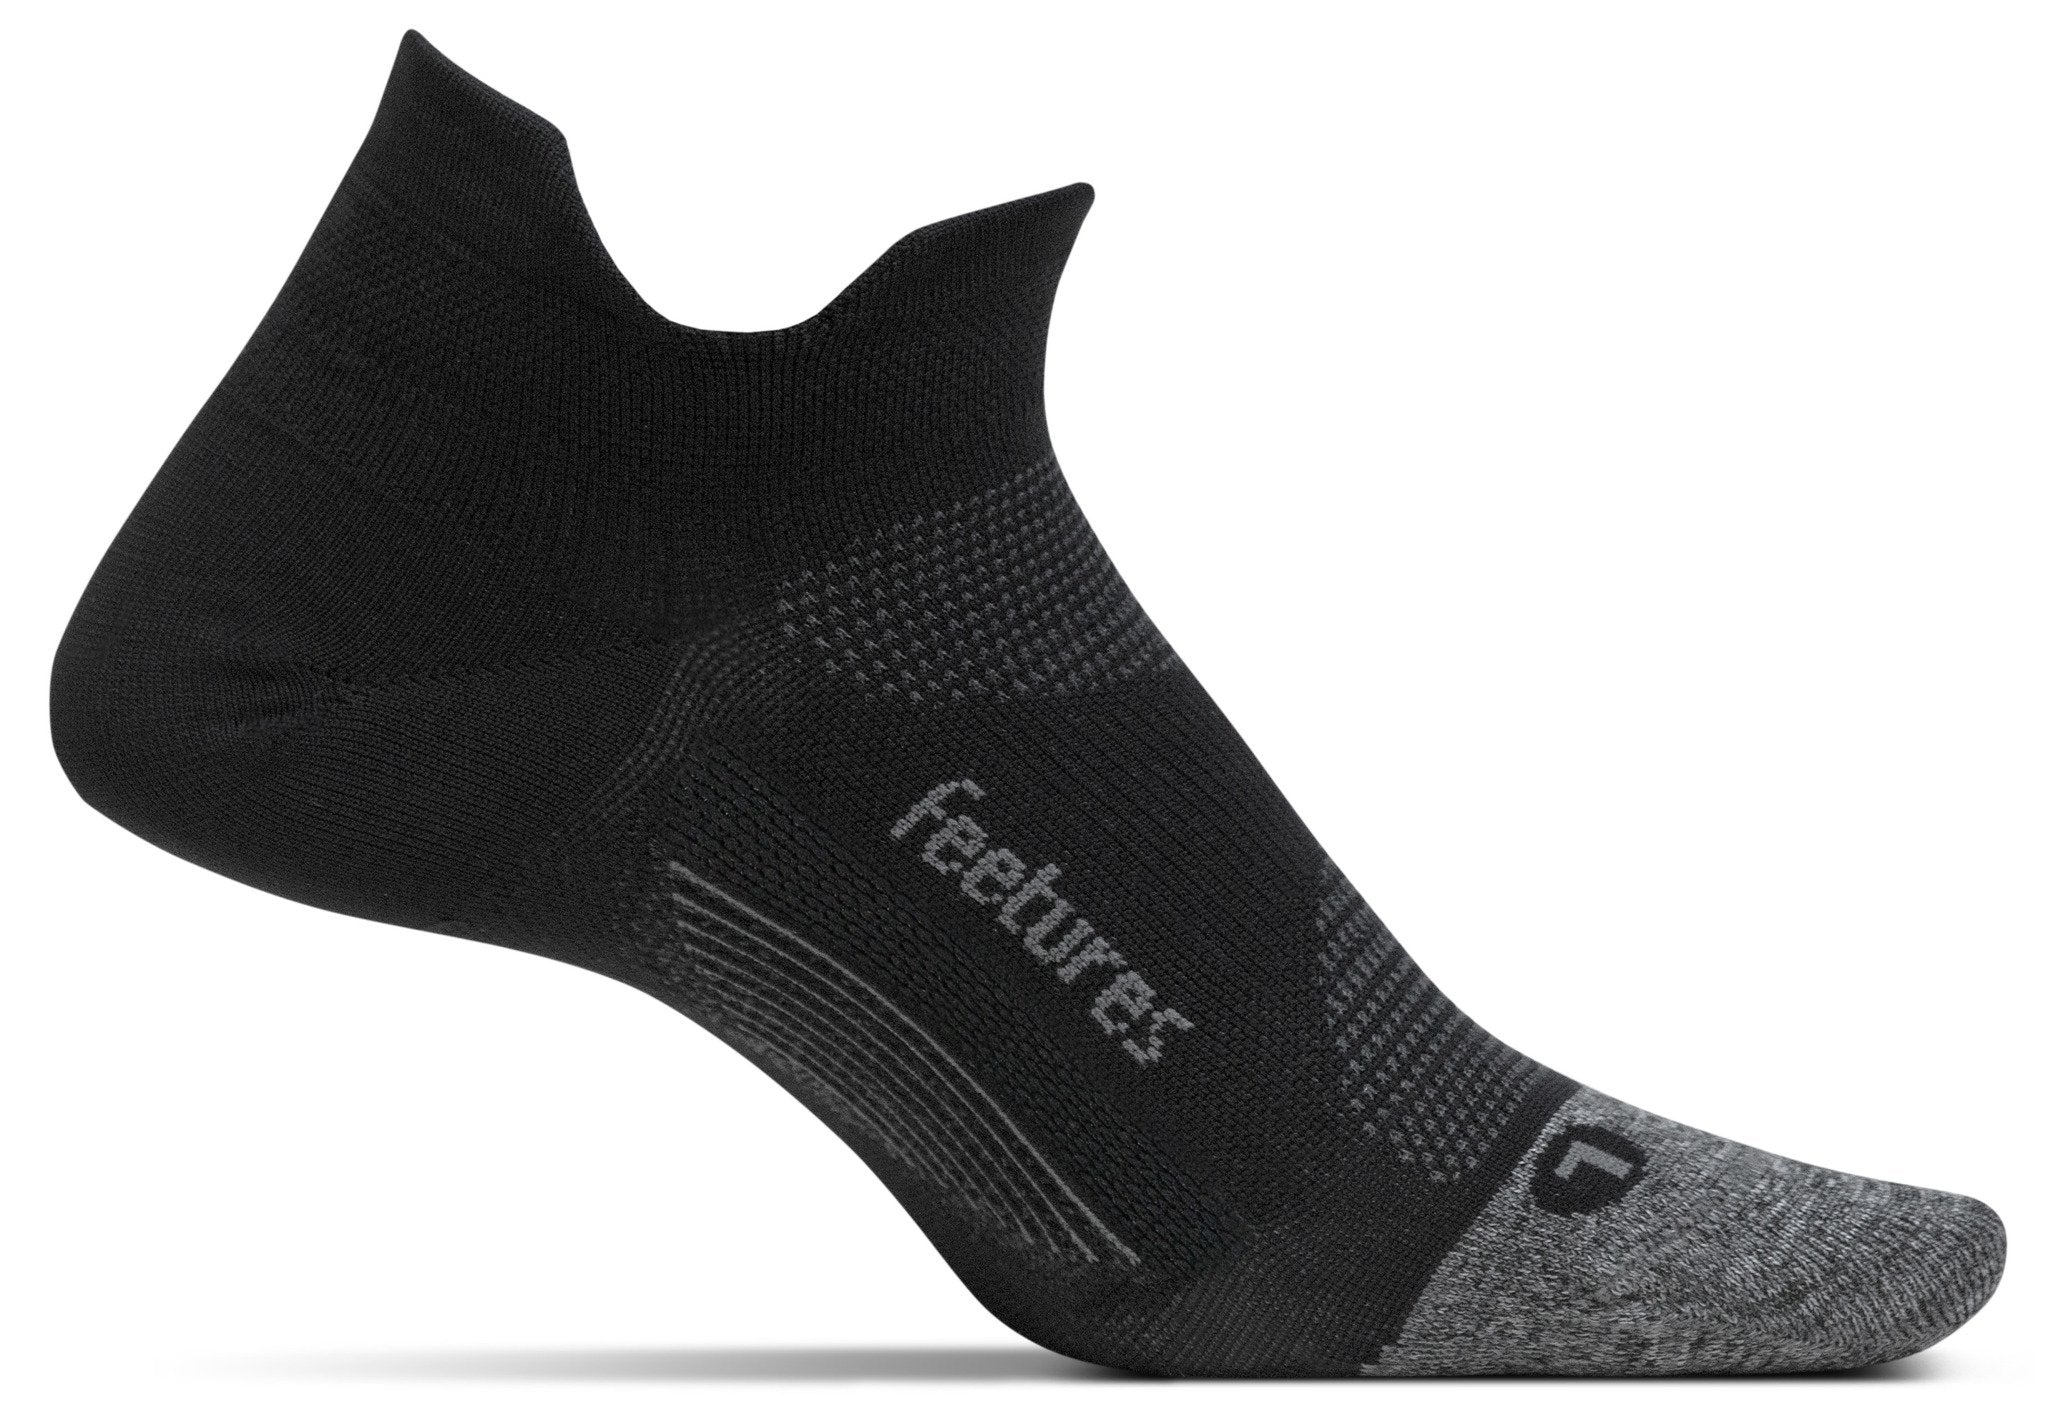 A medial view of the Feetures Elite Ultra Light no show running sock (left foot) in the color black